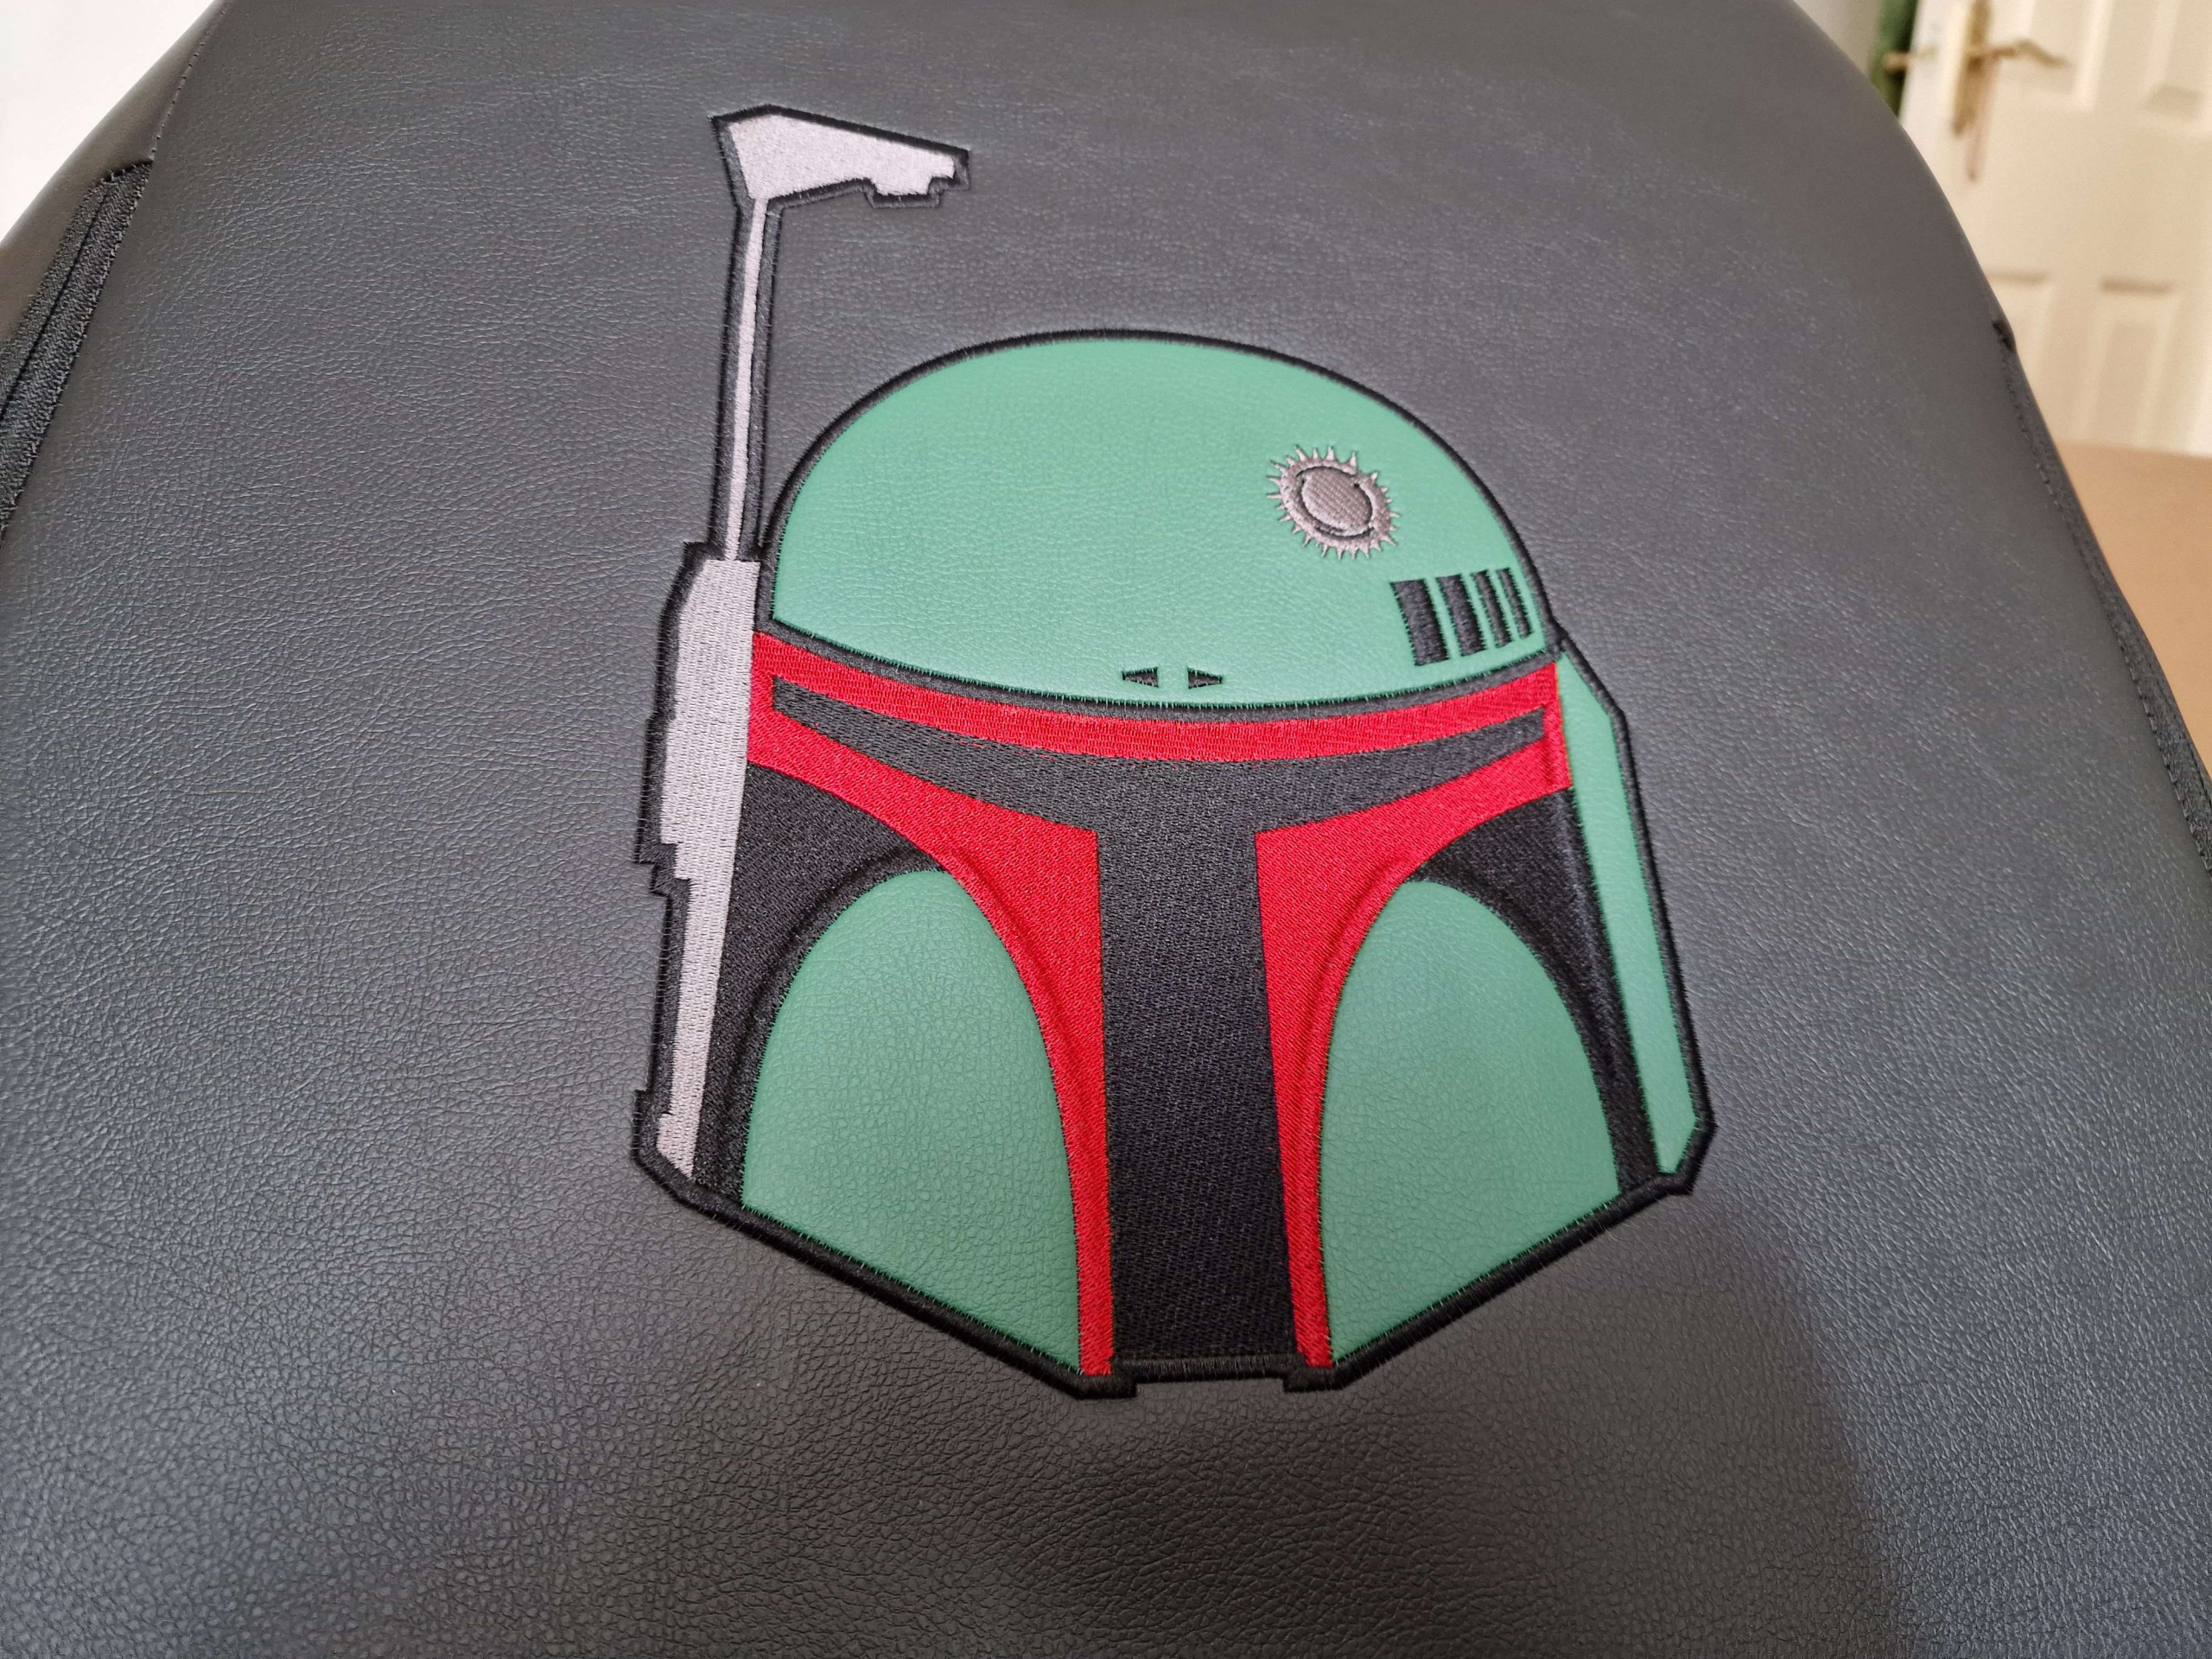 On the back of the chair the embroidered helmet of Boba Fett sits proudly, along with battle mark at the top.